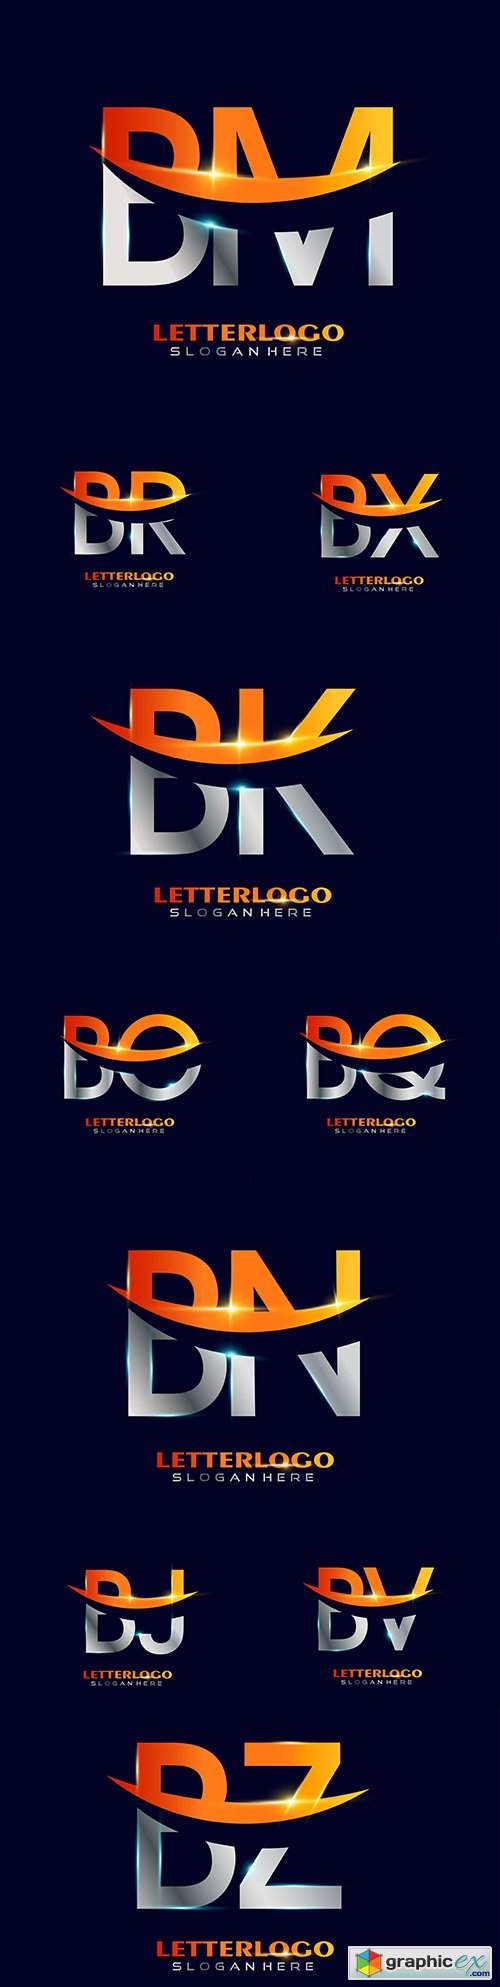  Initial letter and Brand name company logos design 2 